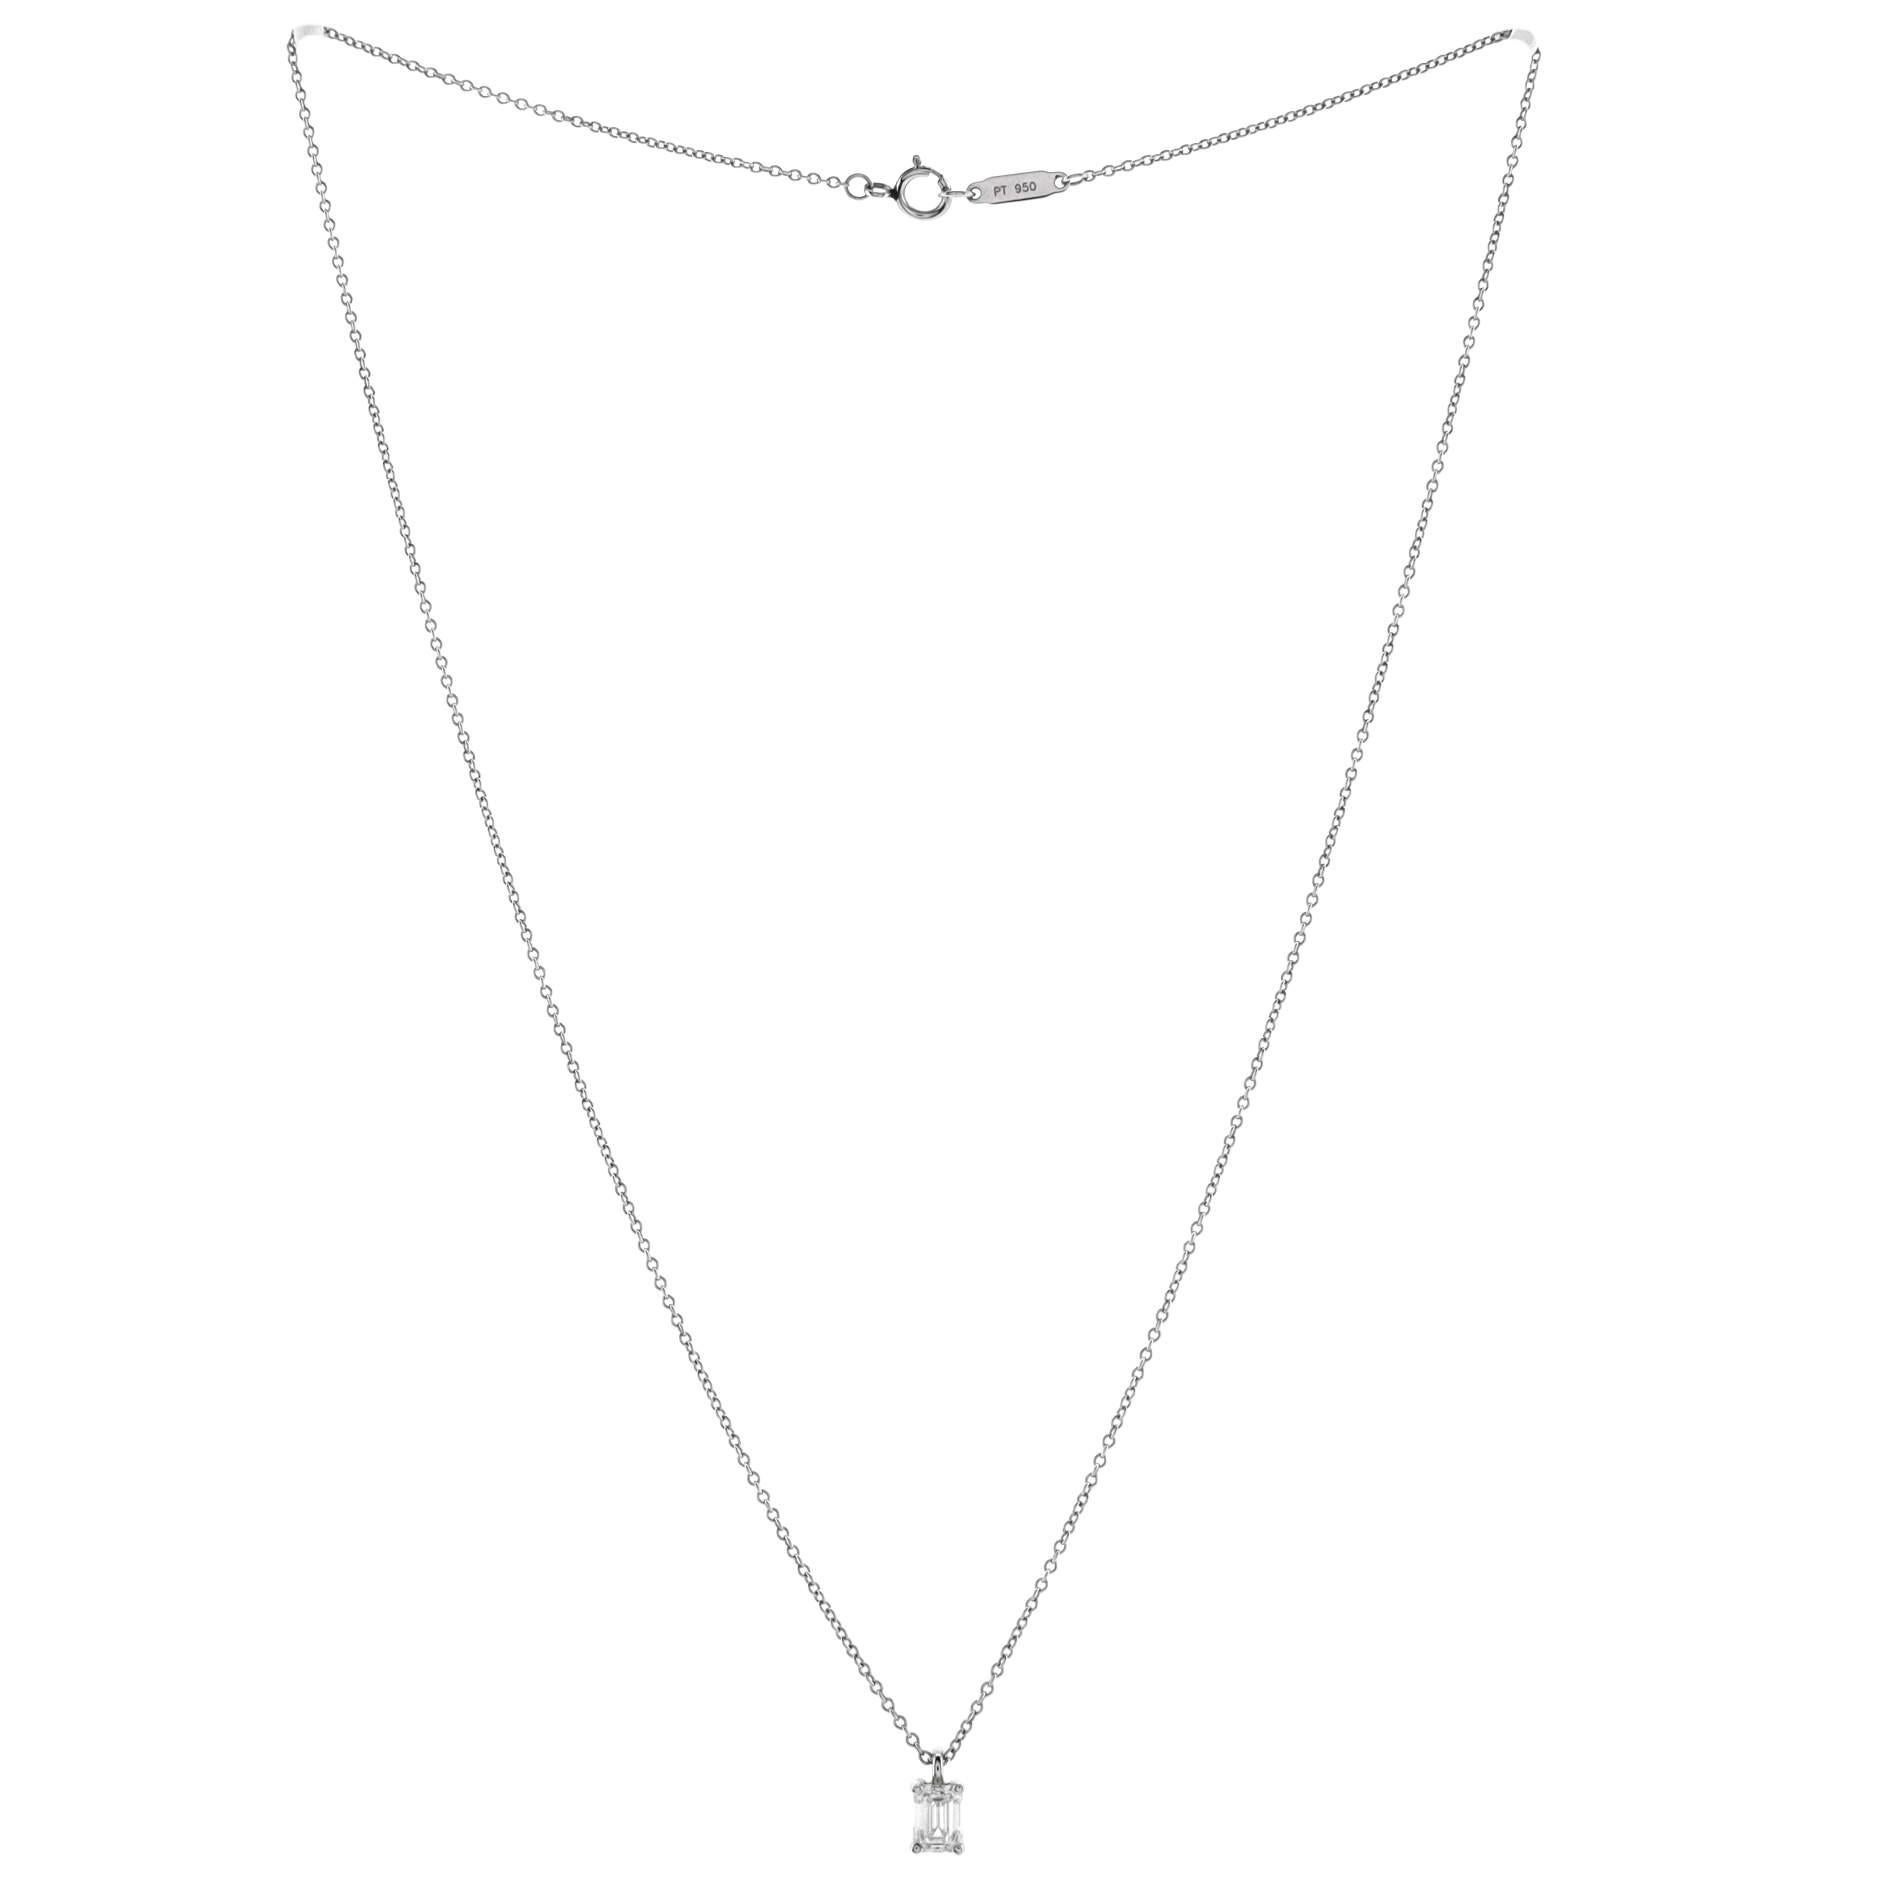 Tiffany & Co. Solitaire Pendant Necklace Platinum with Emerald Cut Diamond0.49CT In Good Condition For Sale In New York, NY